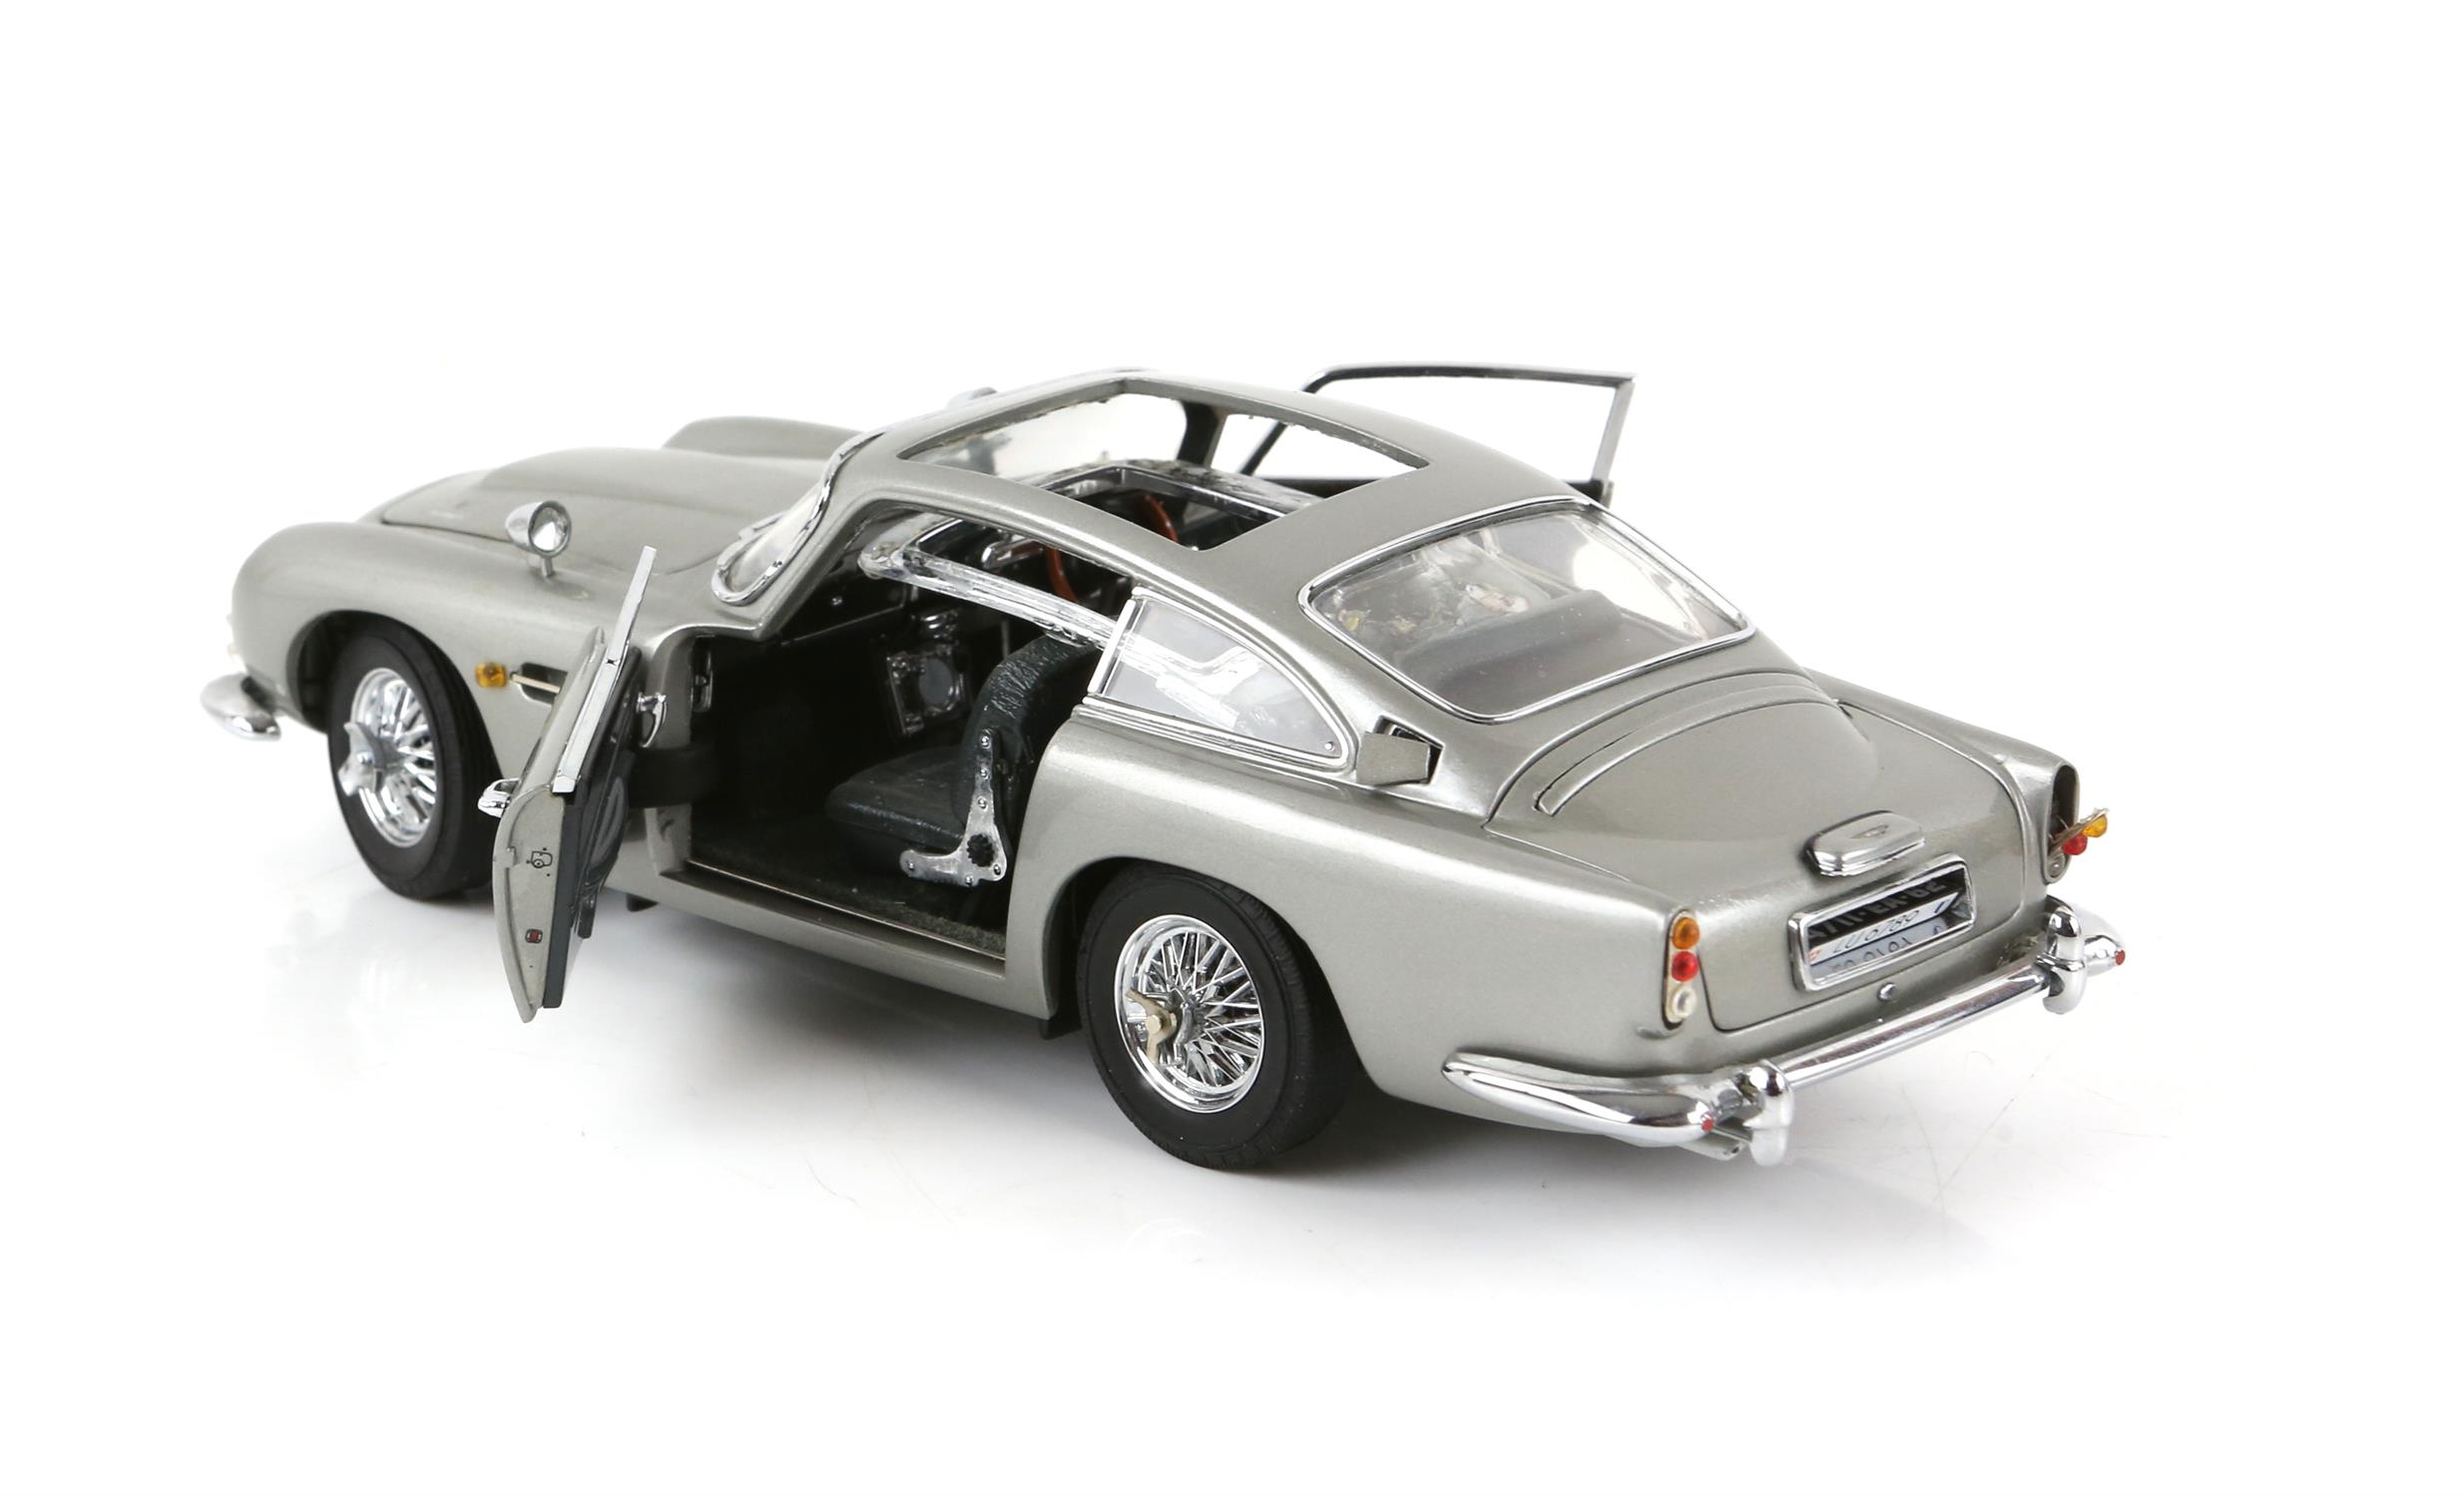 James Bond 007 - Danbury Mint Aston Martin DB5, 1:24 scale authorised replica of the car driven by - Image 4 of 5